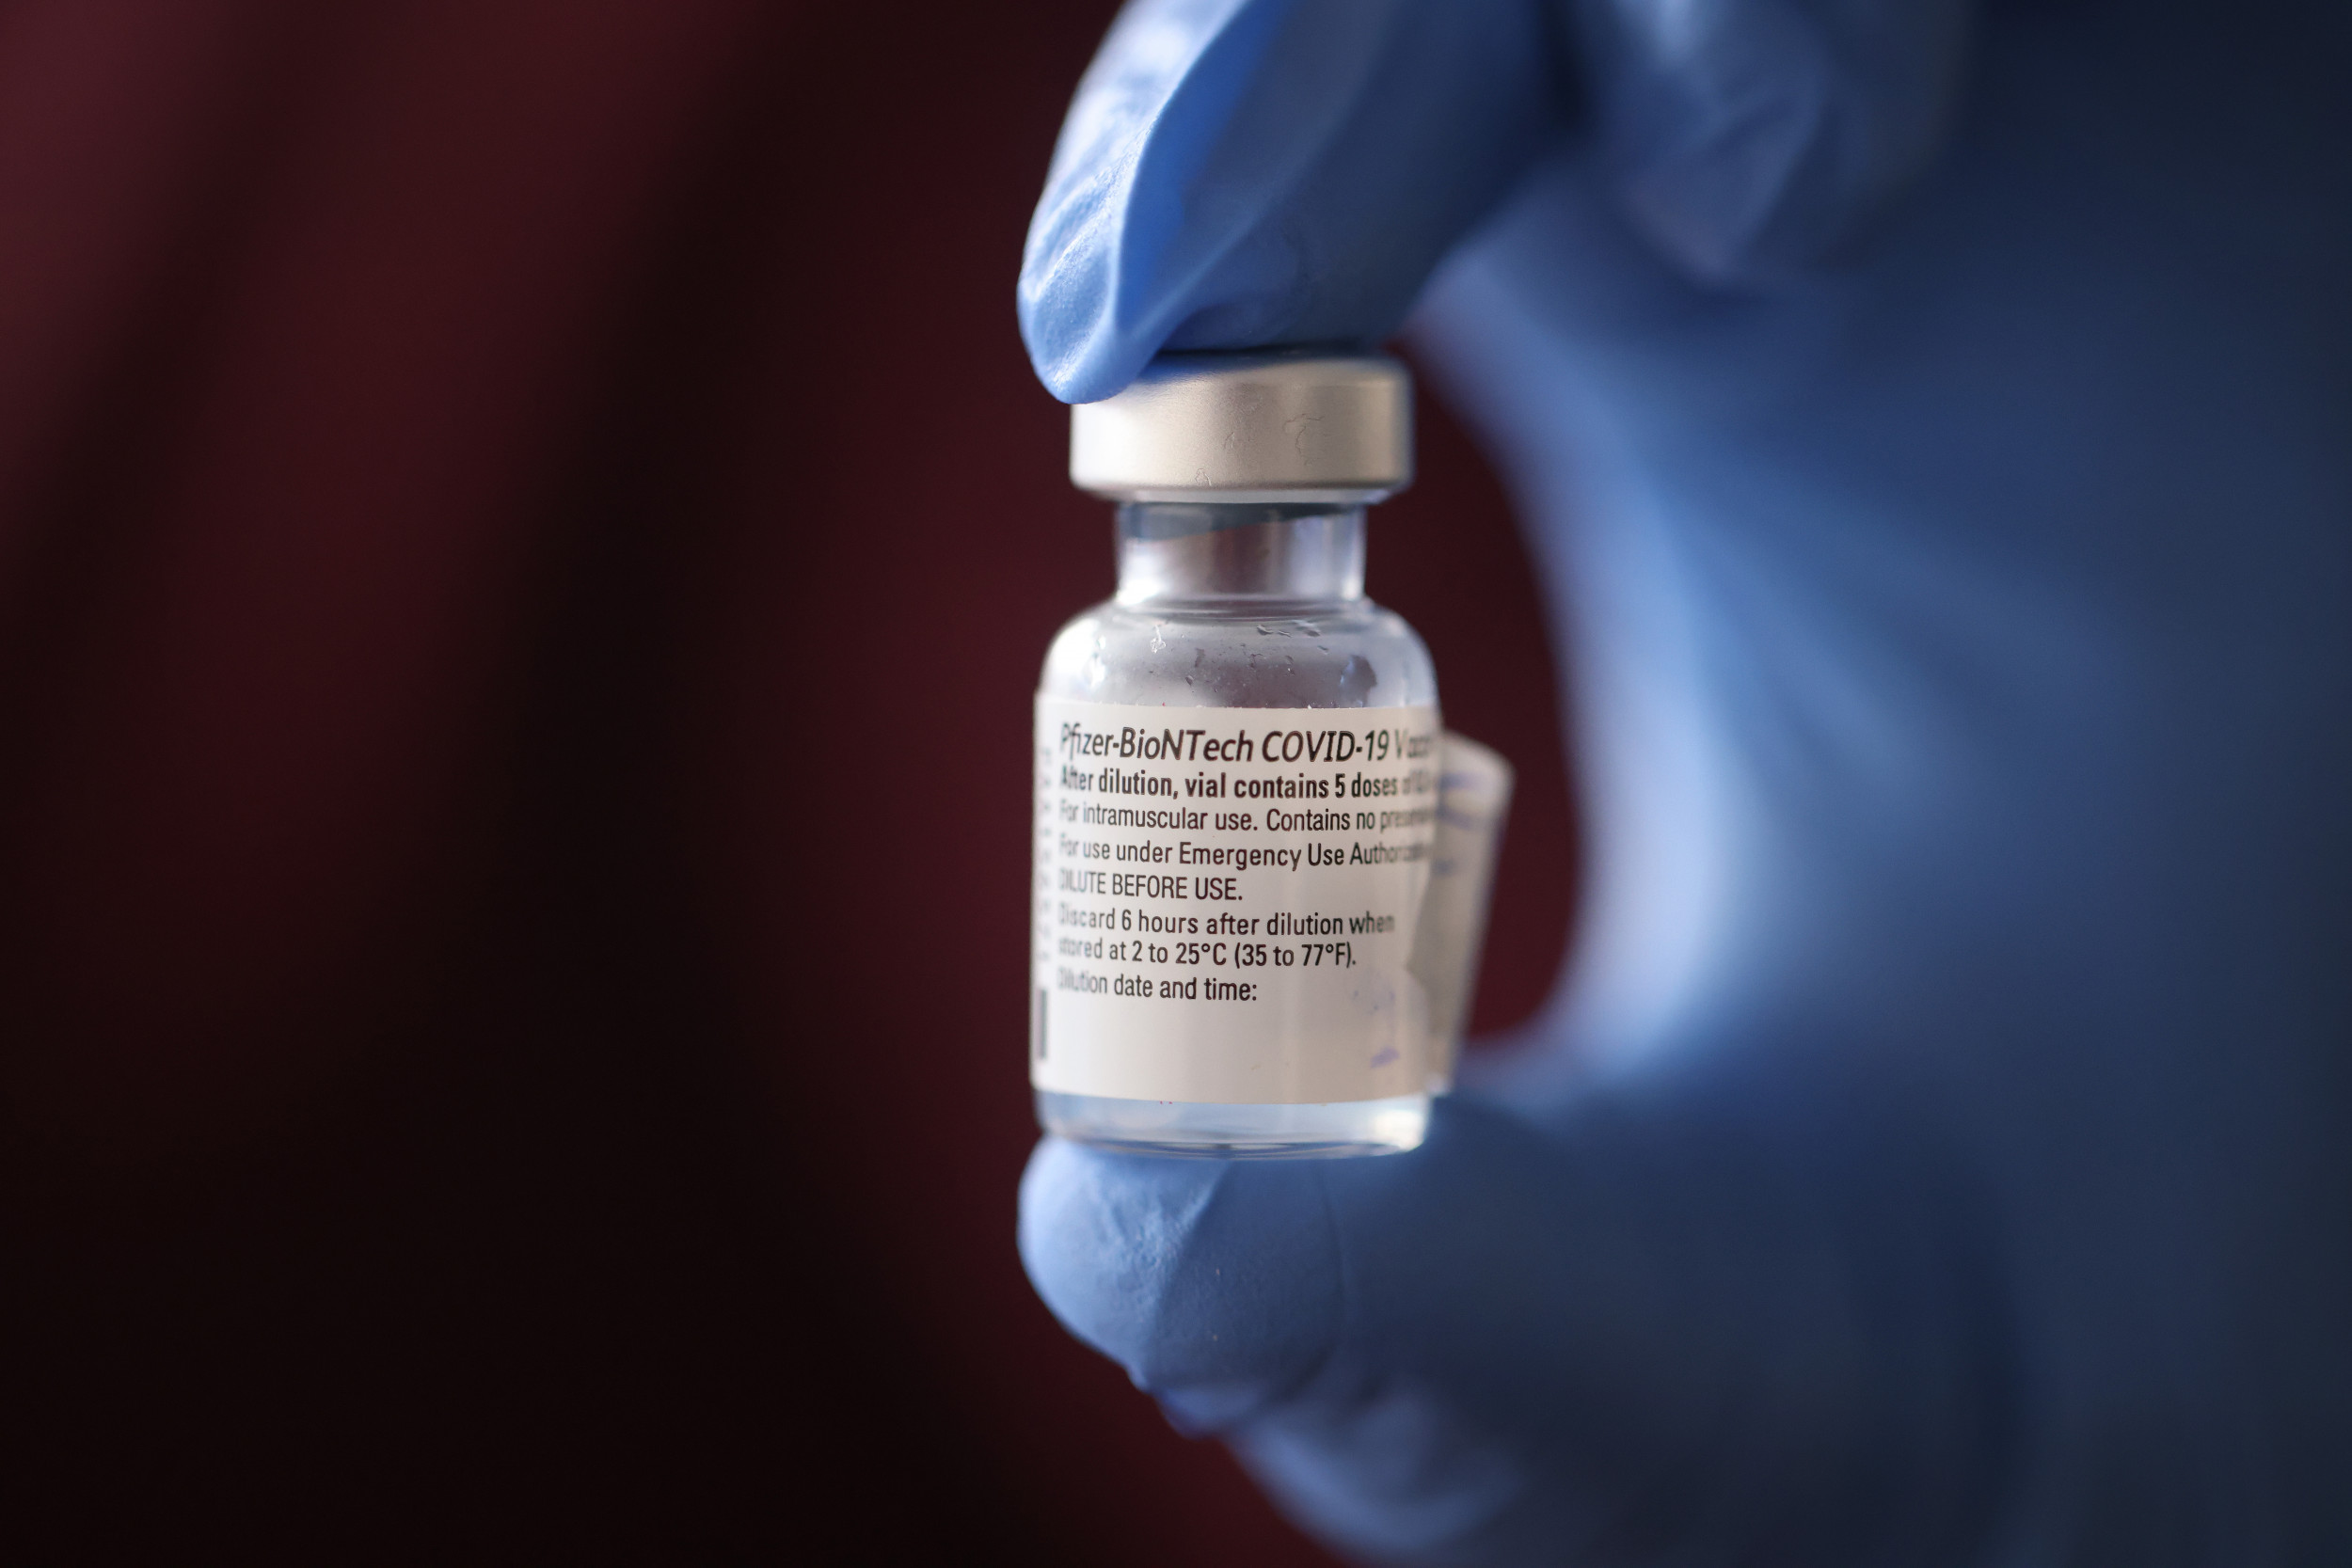 CDC now recommends vaccinating those with pre-existing conditions for COVID-19